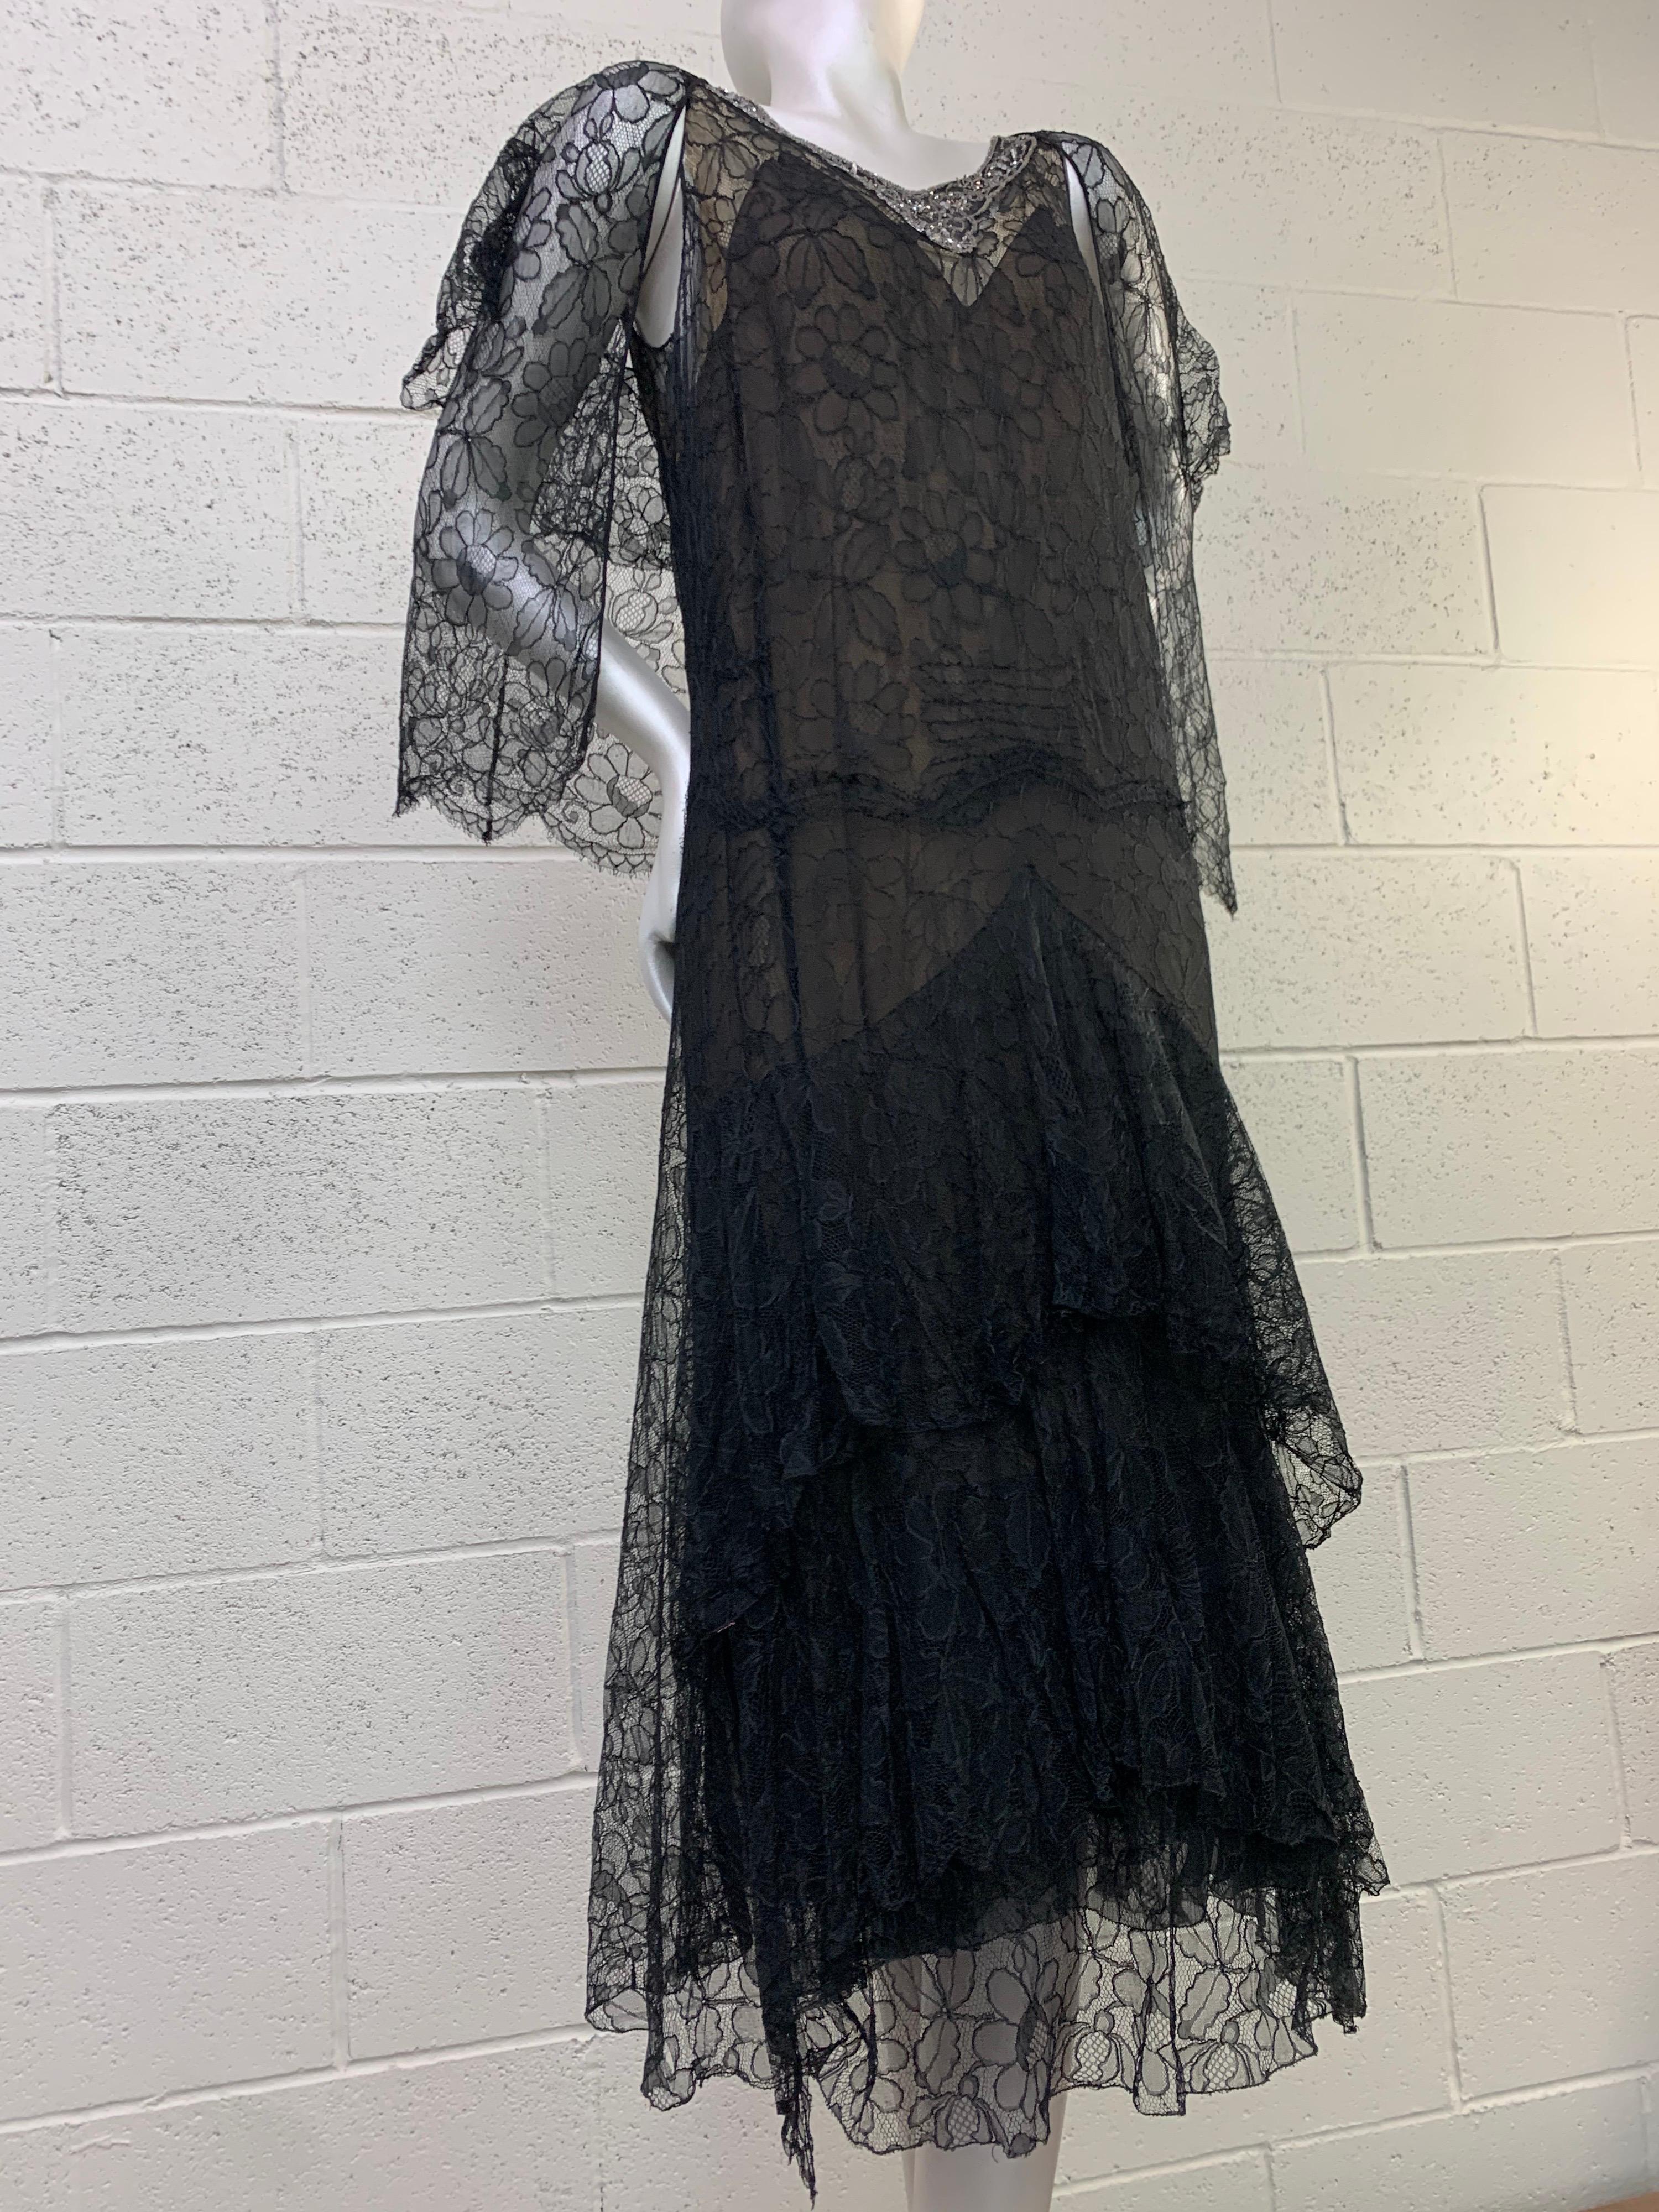 An exquisite 1920s Blackshire black silk lace dress with tiers of ruffle detailing in skirt and a matching jacket. Neckline and low scoop back are embellished with faux pearls and beadwork. Such an enchanting ensemble. Size 4-6.